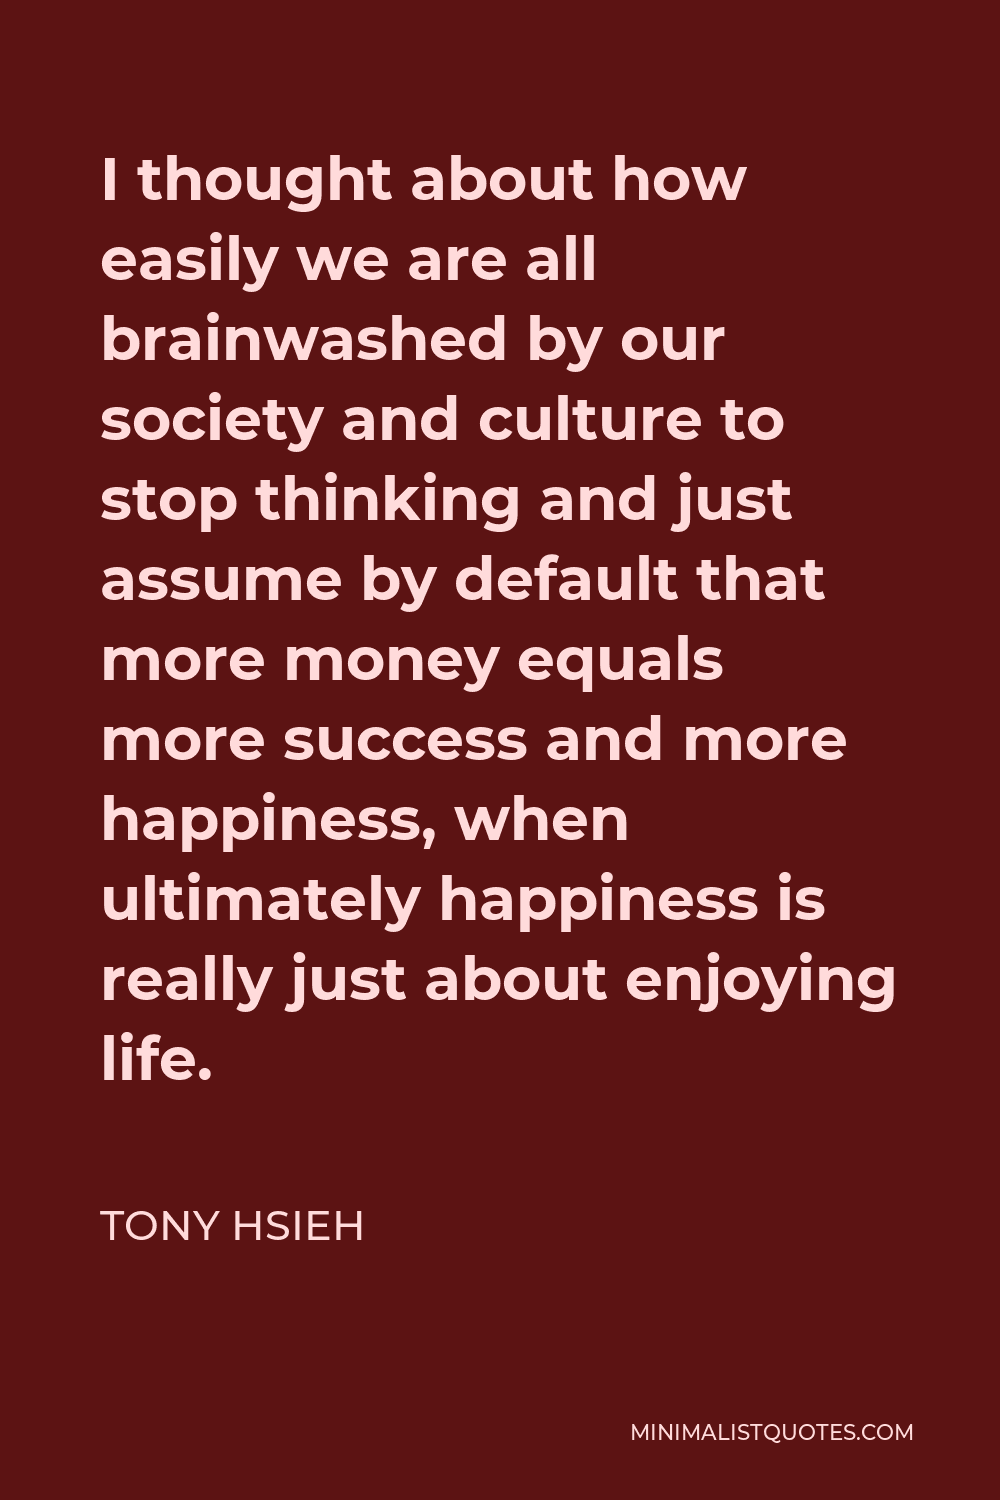 Tony Hsieh Quote - I thought about how easily we are all brainwashed by our society and culture to stop thinking and just assume by default that more money equals more success and more happiness, when ultimately happiness is really just about enjoying life.